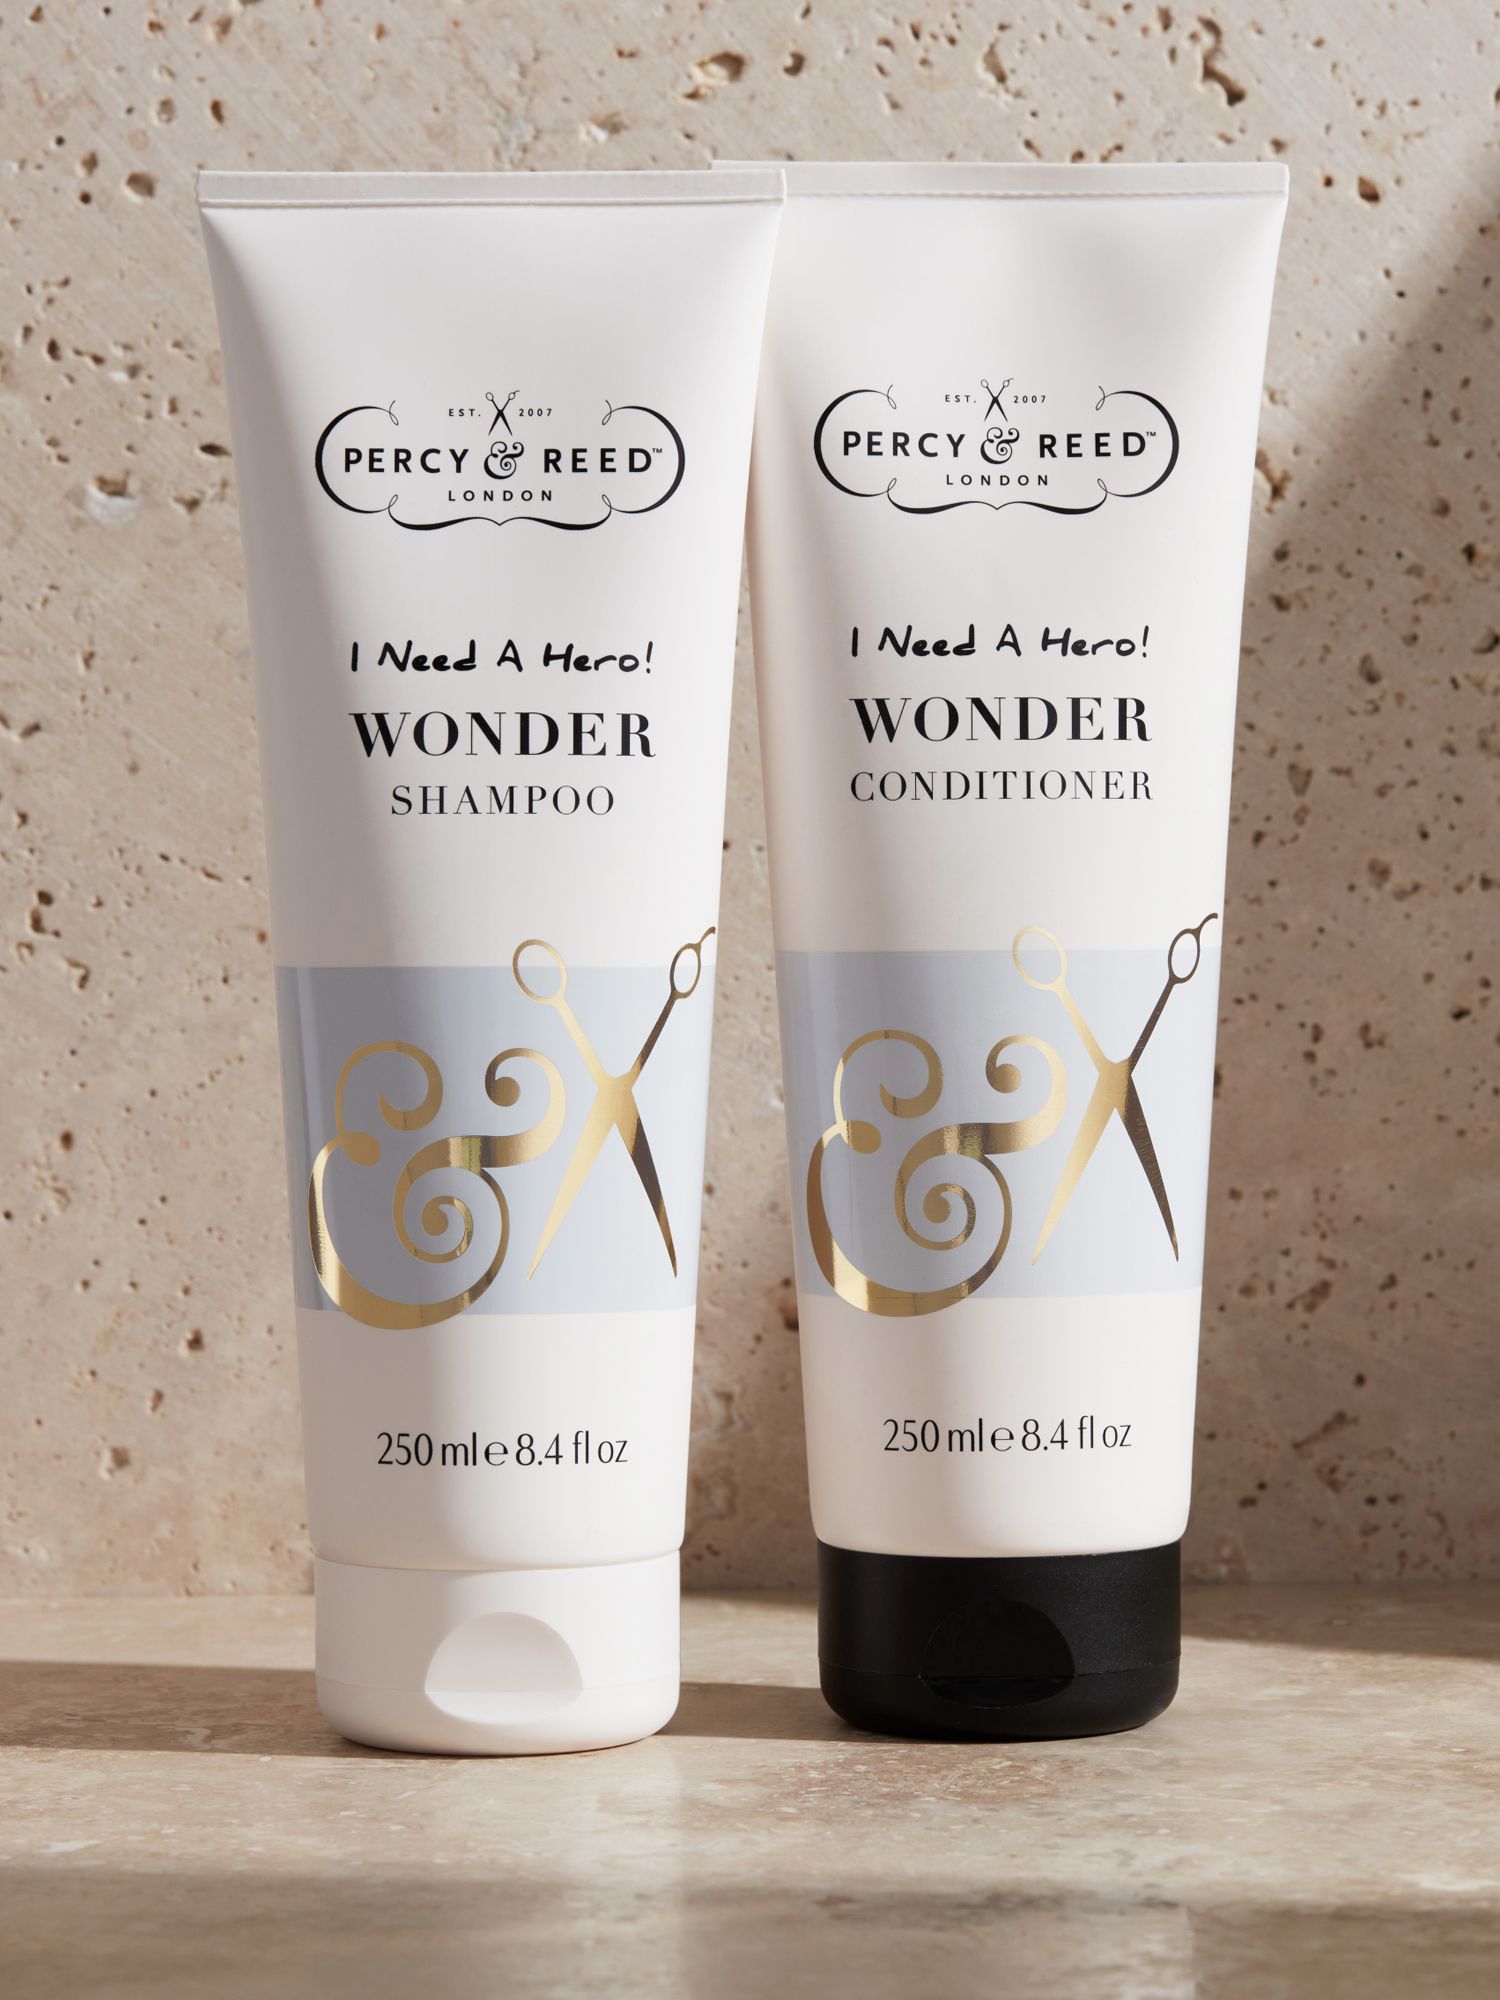 Percy & Reed I Need A Hero! Wonder Conditioner, 250ml 4